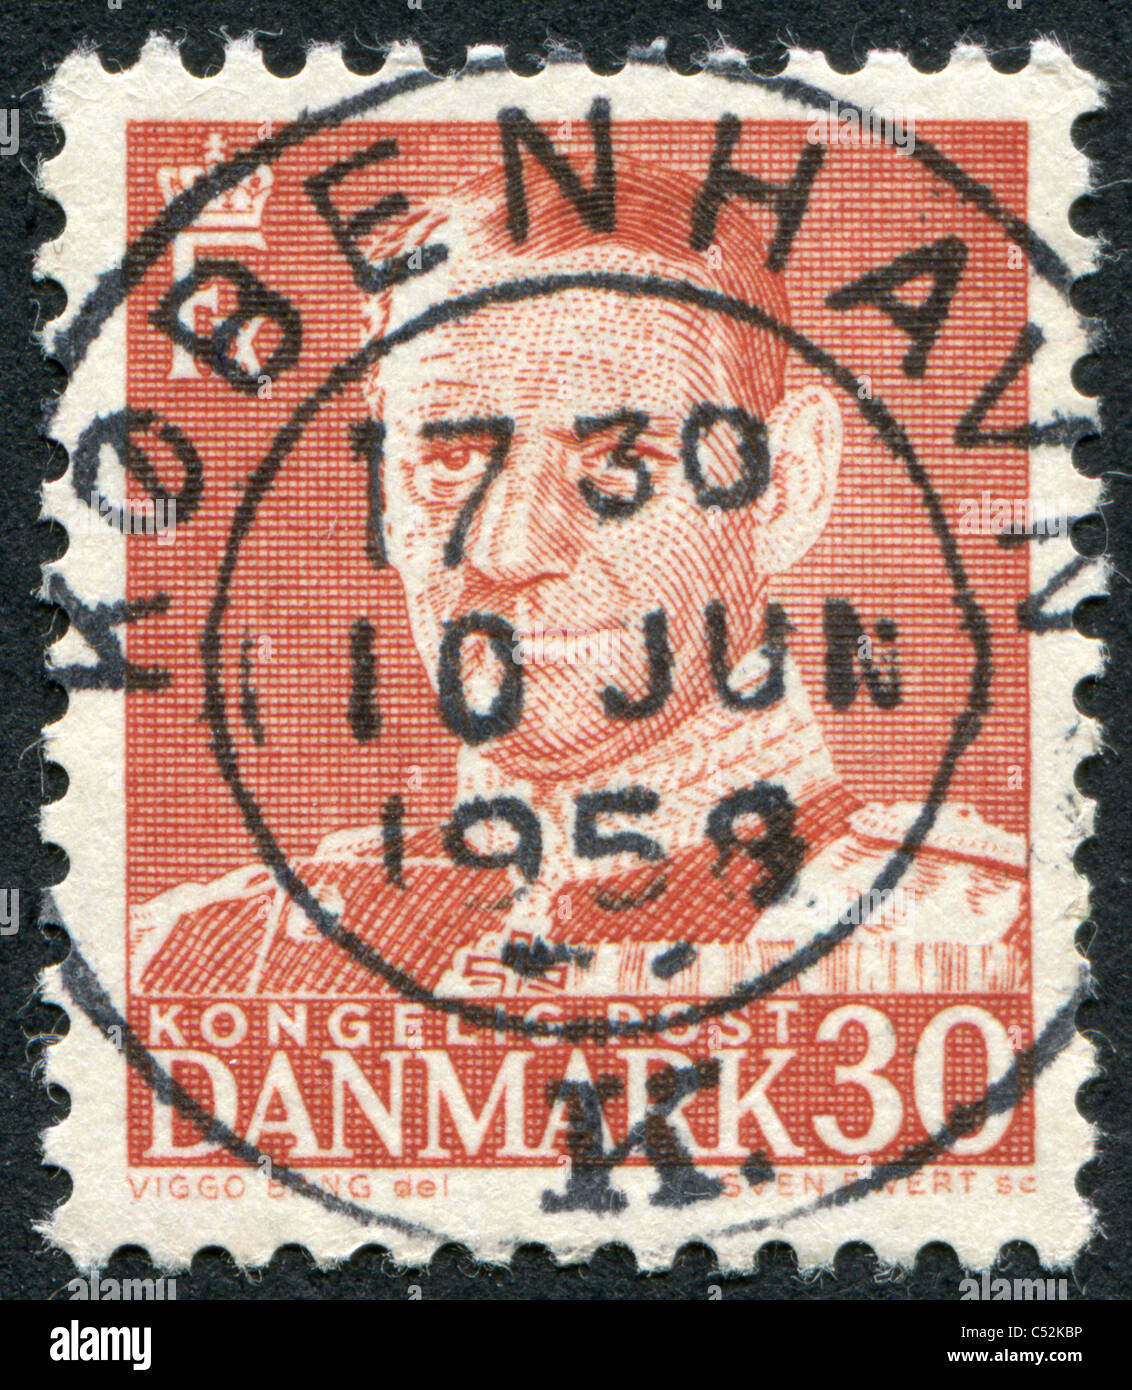 DENMARK 1950: A stamp printed in the Denmark, depicts King Frederick IX Stock Photo